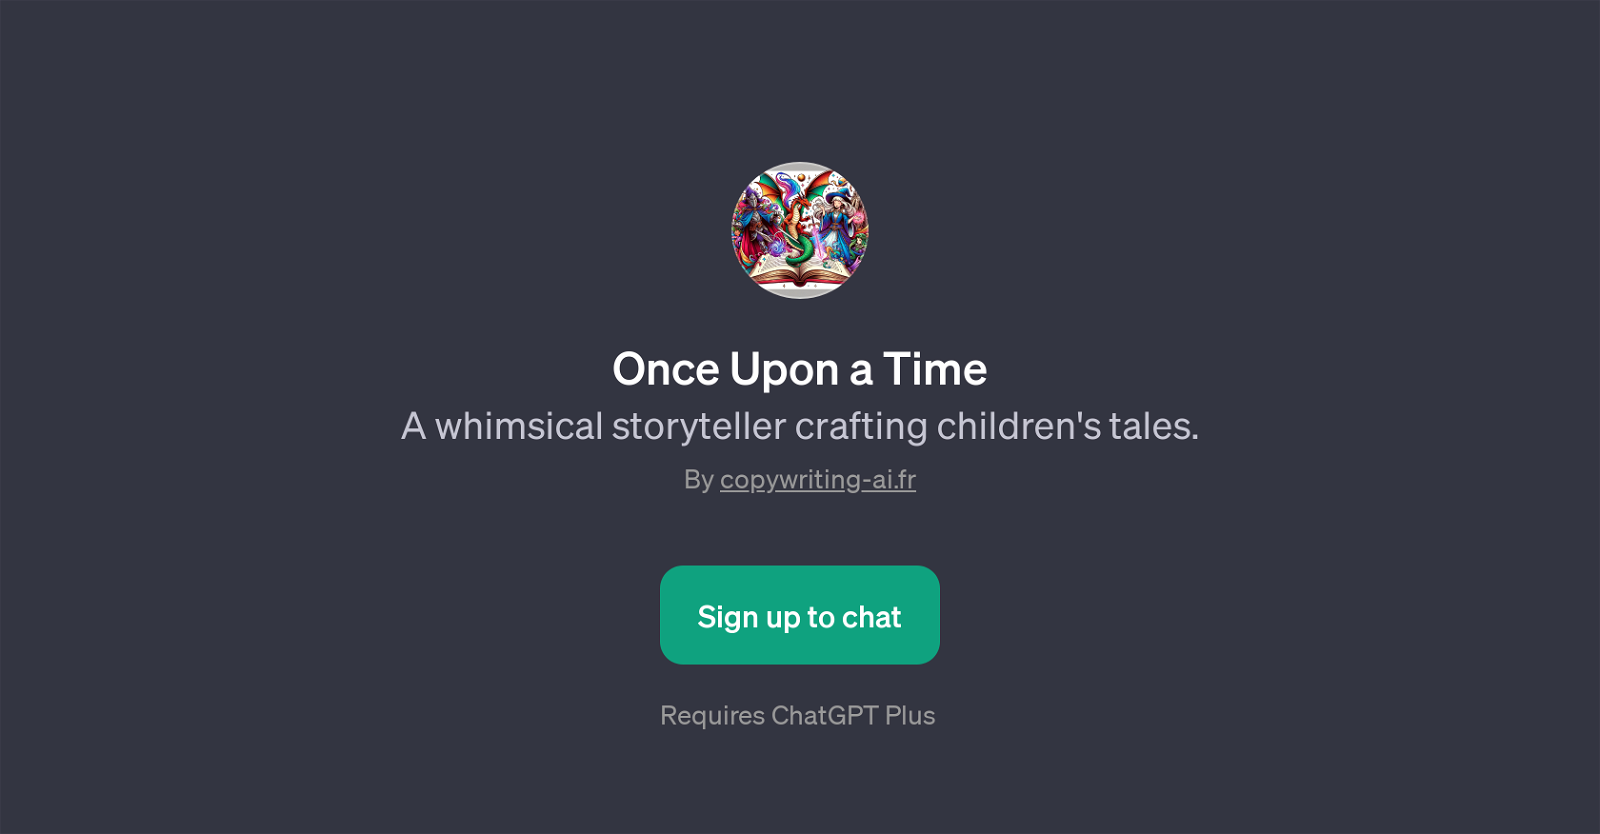 Once Upon a Time website